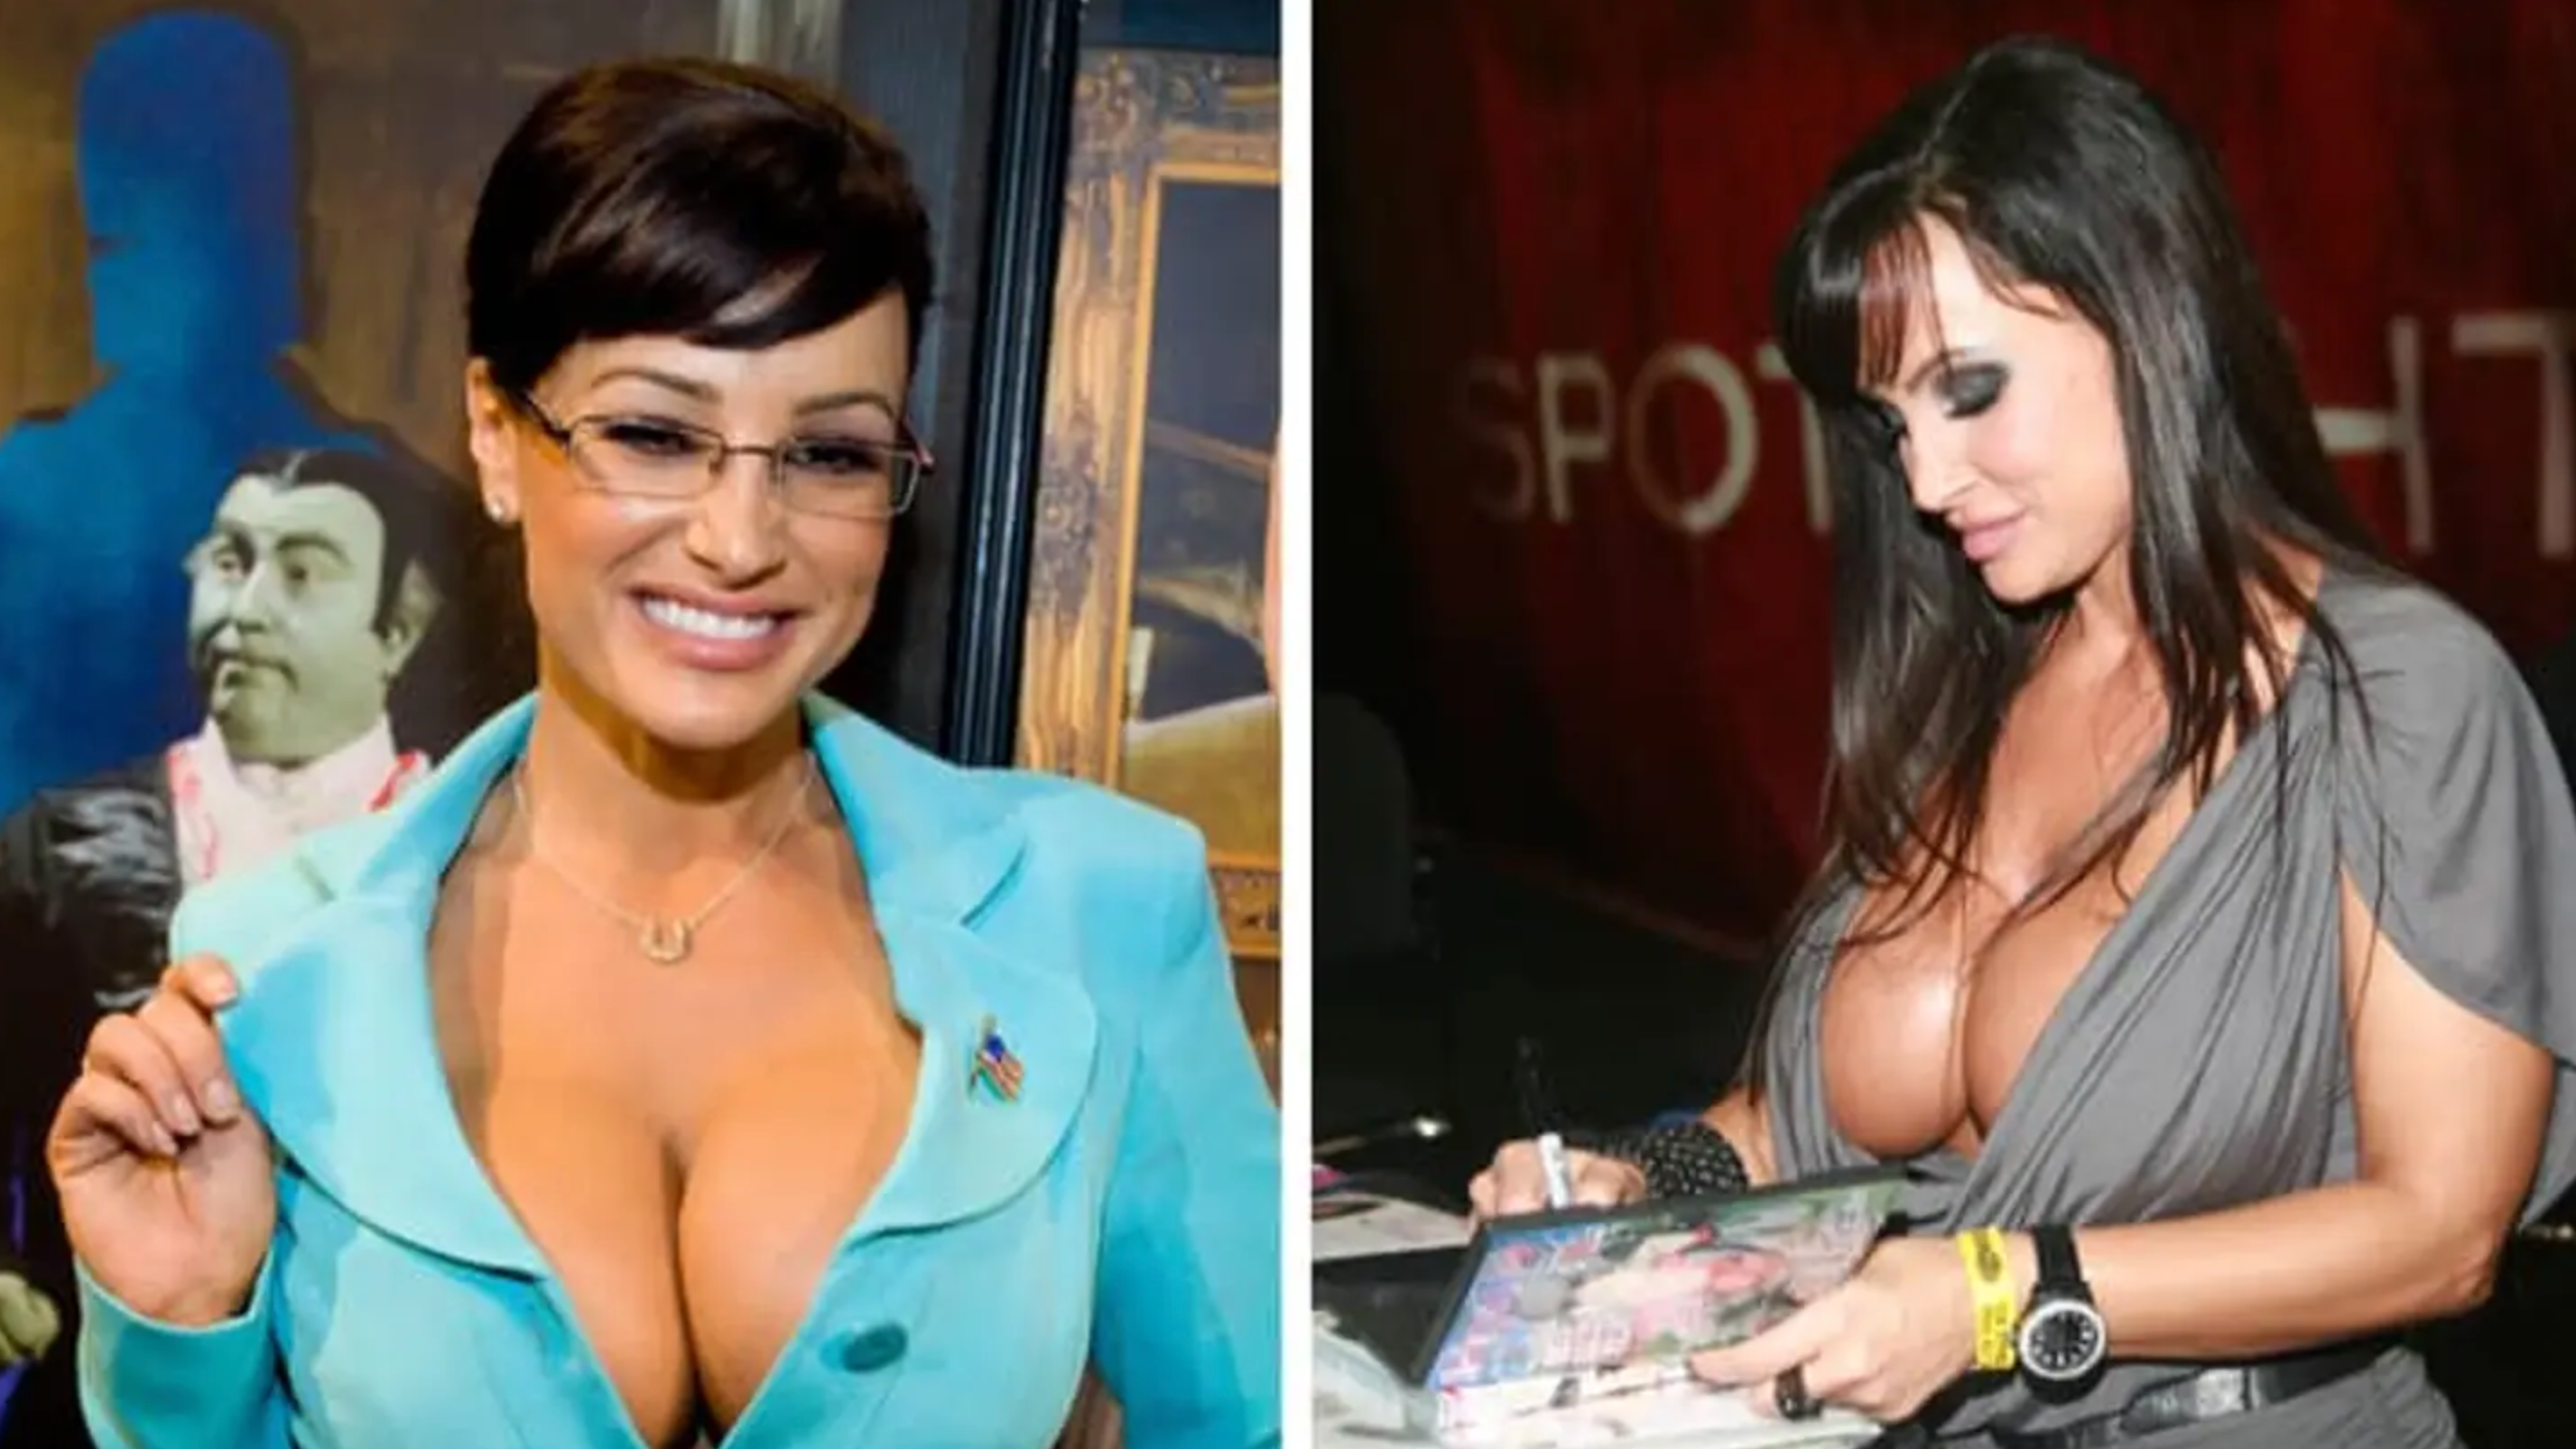 Lisa Ann reveals which athletes are the best in the bedroom